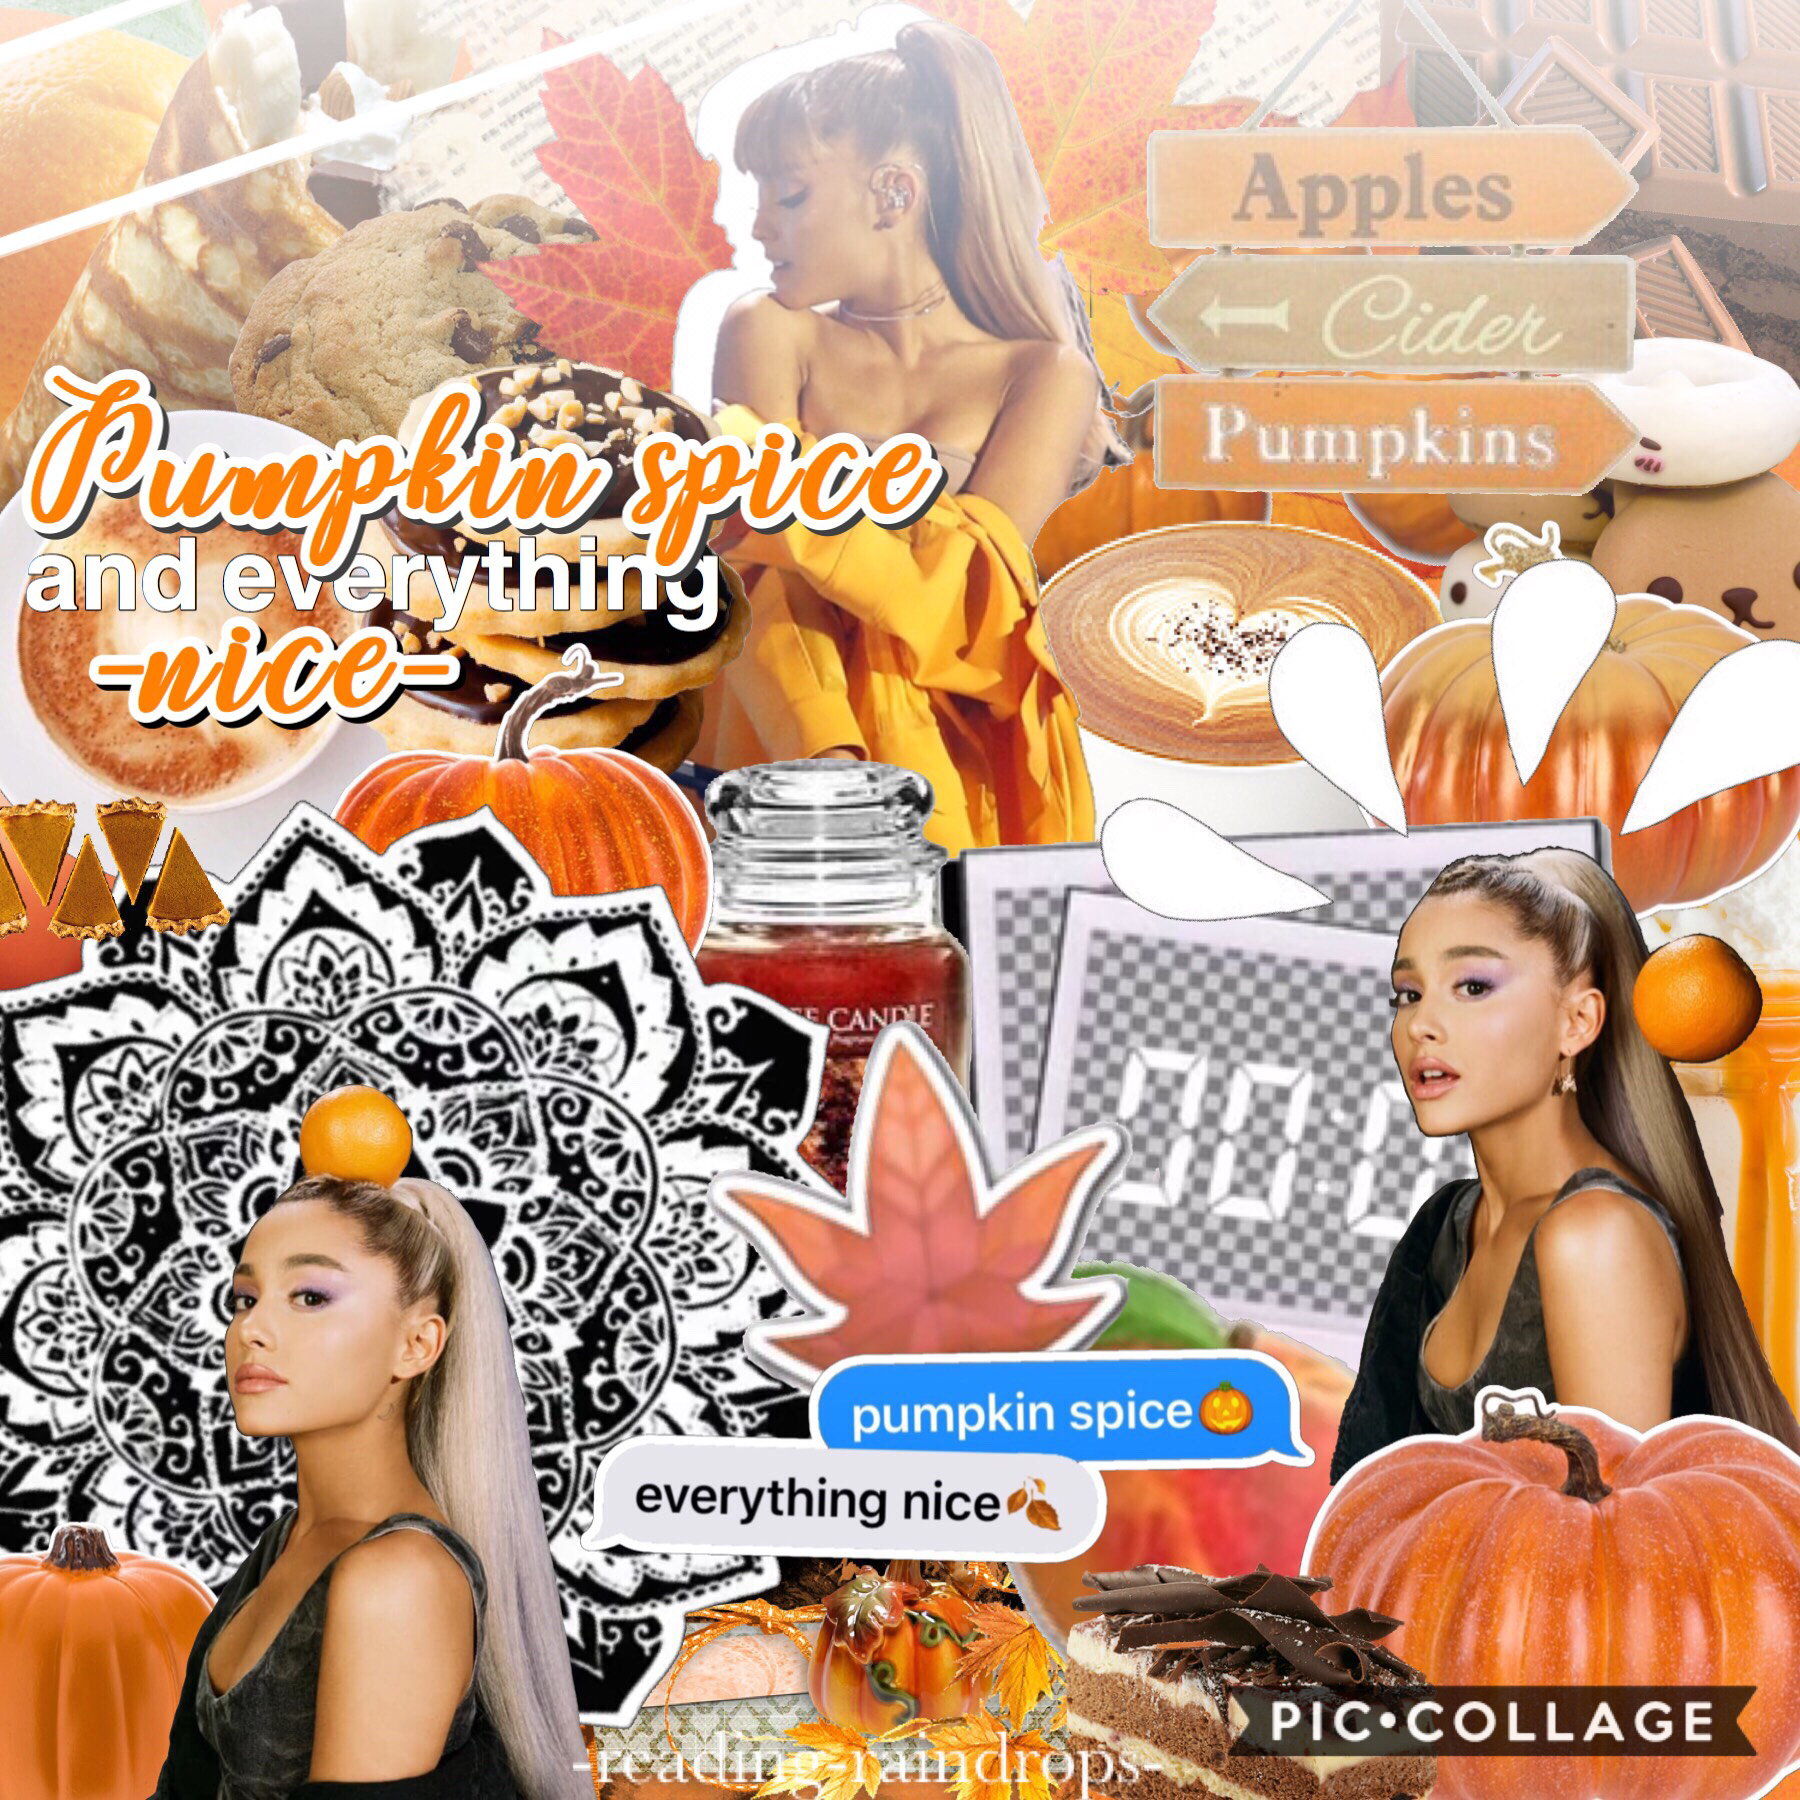 TAPPP
WOOHOO!!!! I POSTED MY FIRST COMPLEX EDIT!!! Well, I made one before this one, but it’s for the next theme😉 It isn’t great but that’s ok! I’ll have the sources in the remixes! 🍁